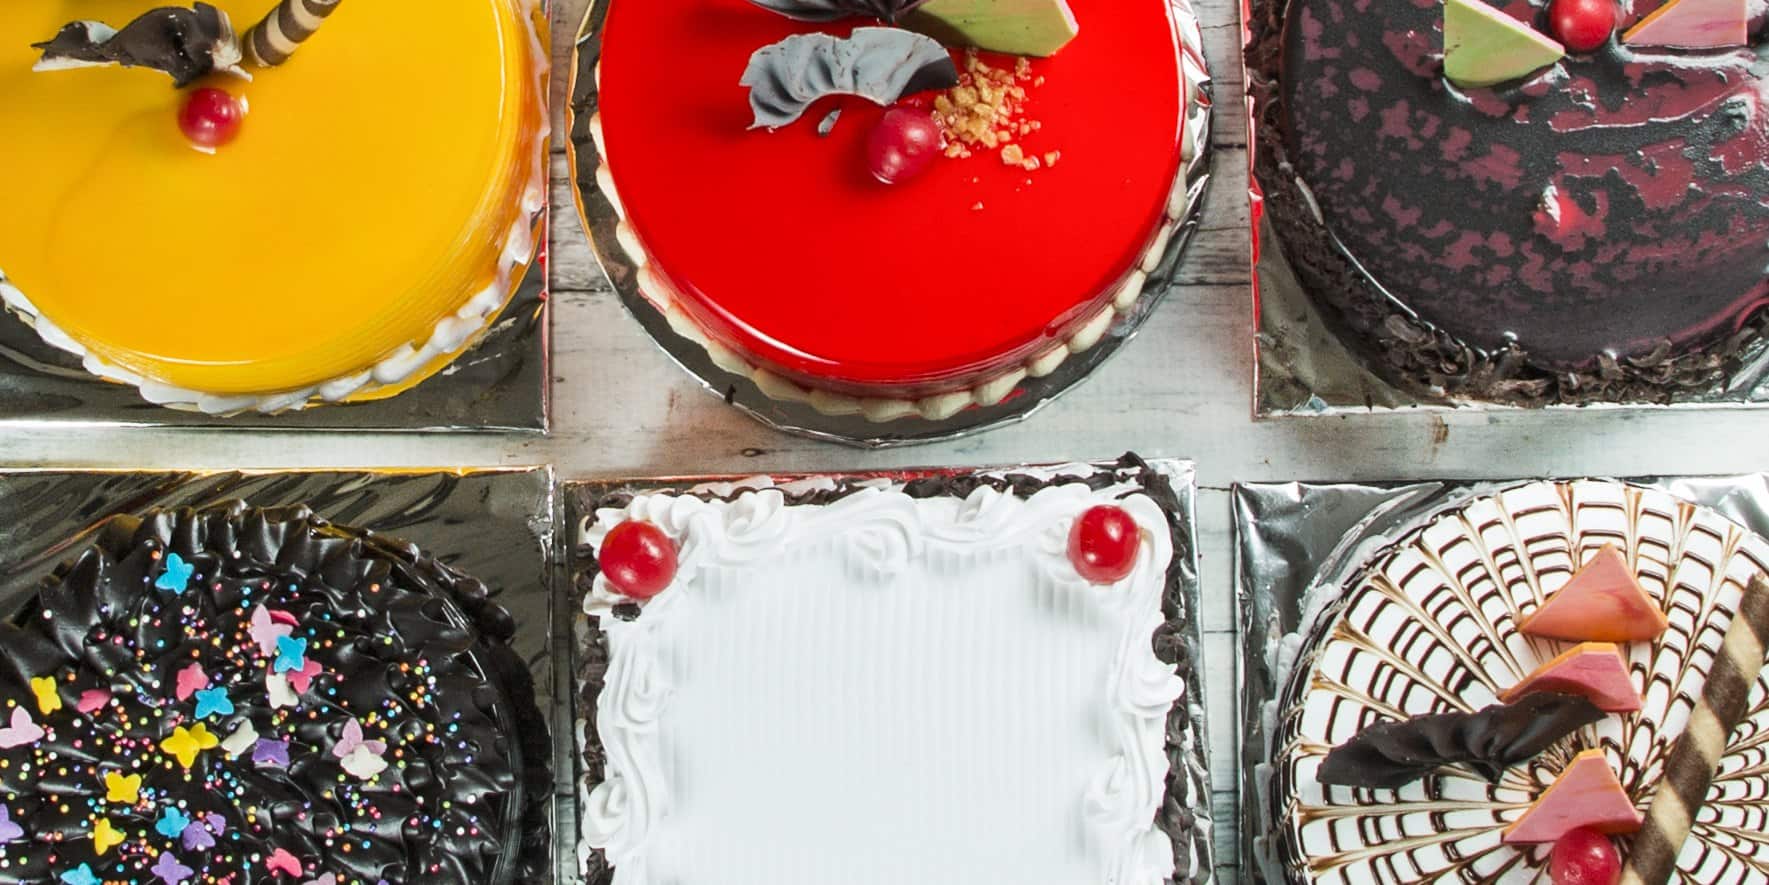 Cake and cream in Wakad,Pune - Best Cake Shops in Pune - Justdial